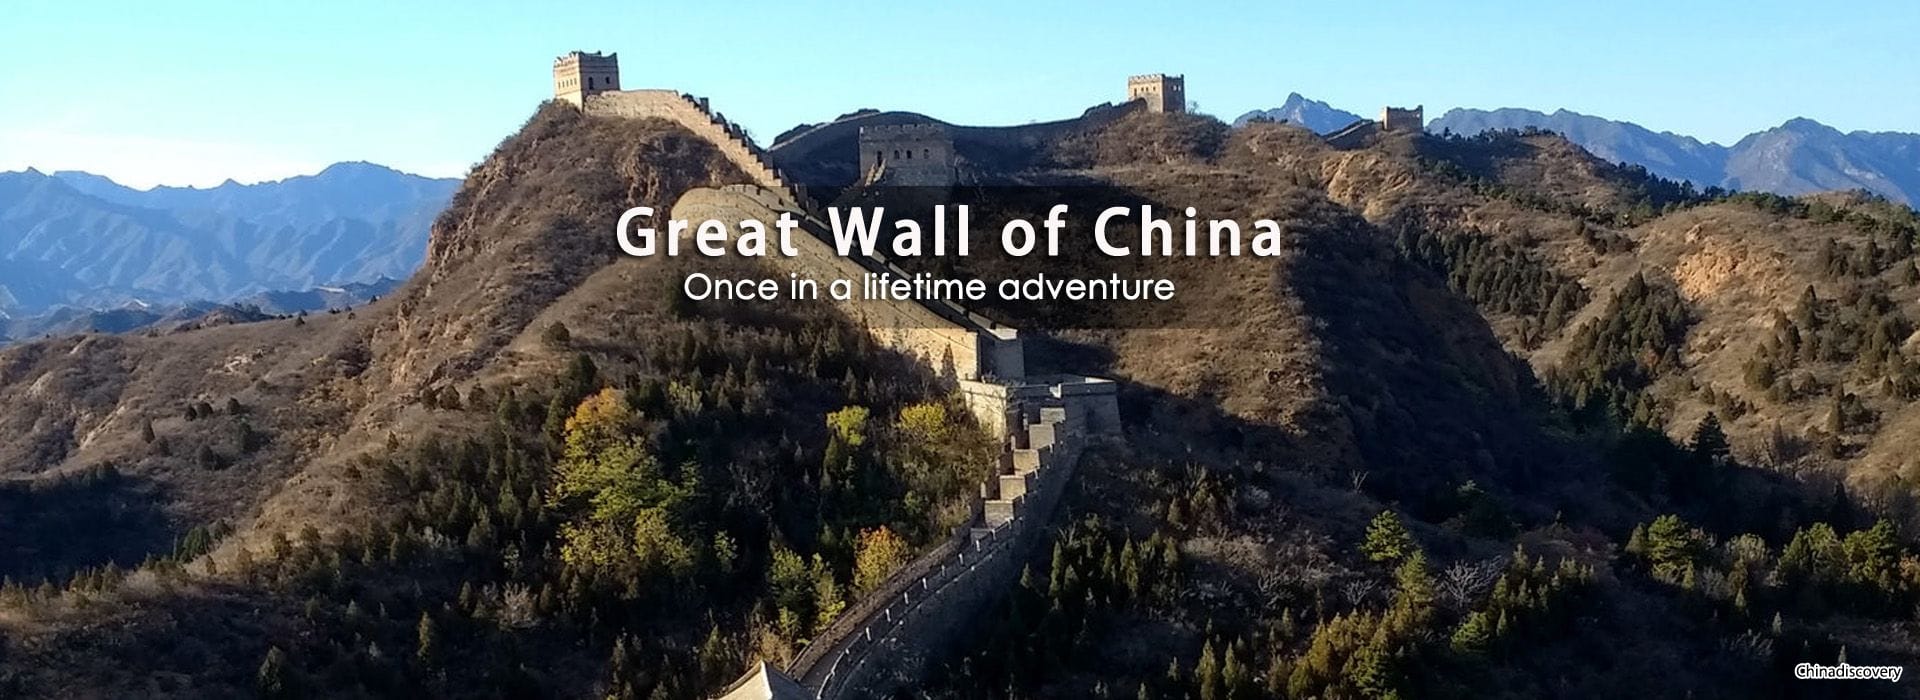 great wall of china guided tour